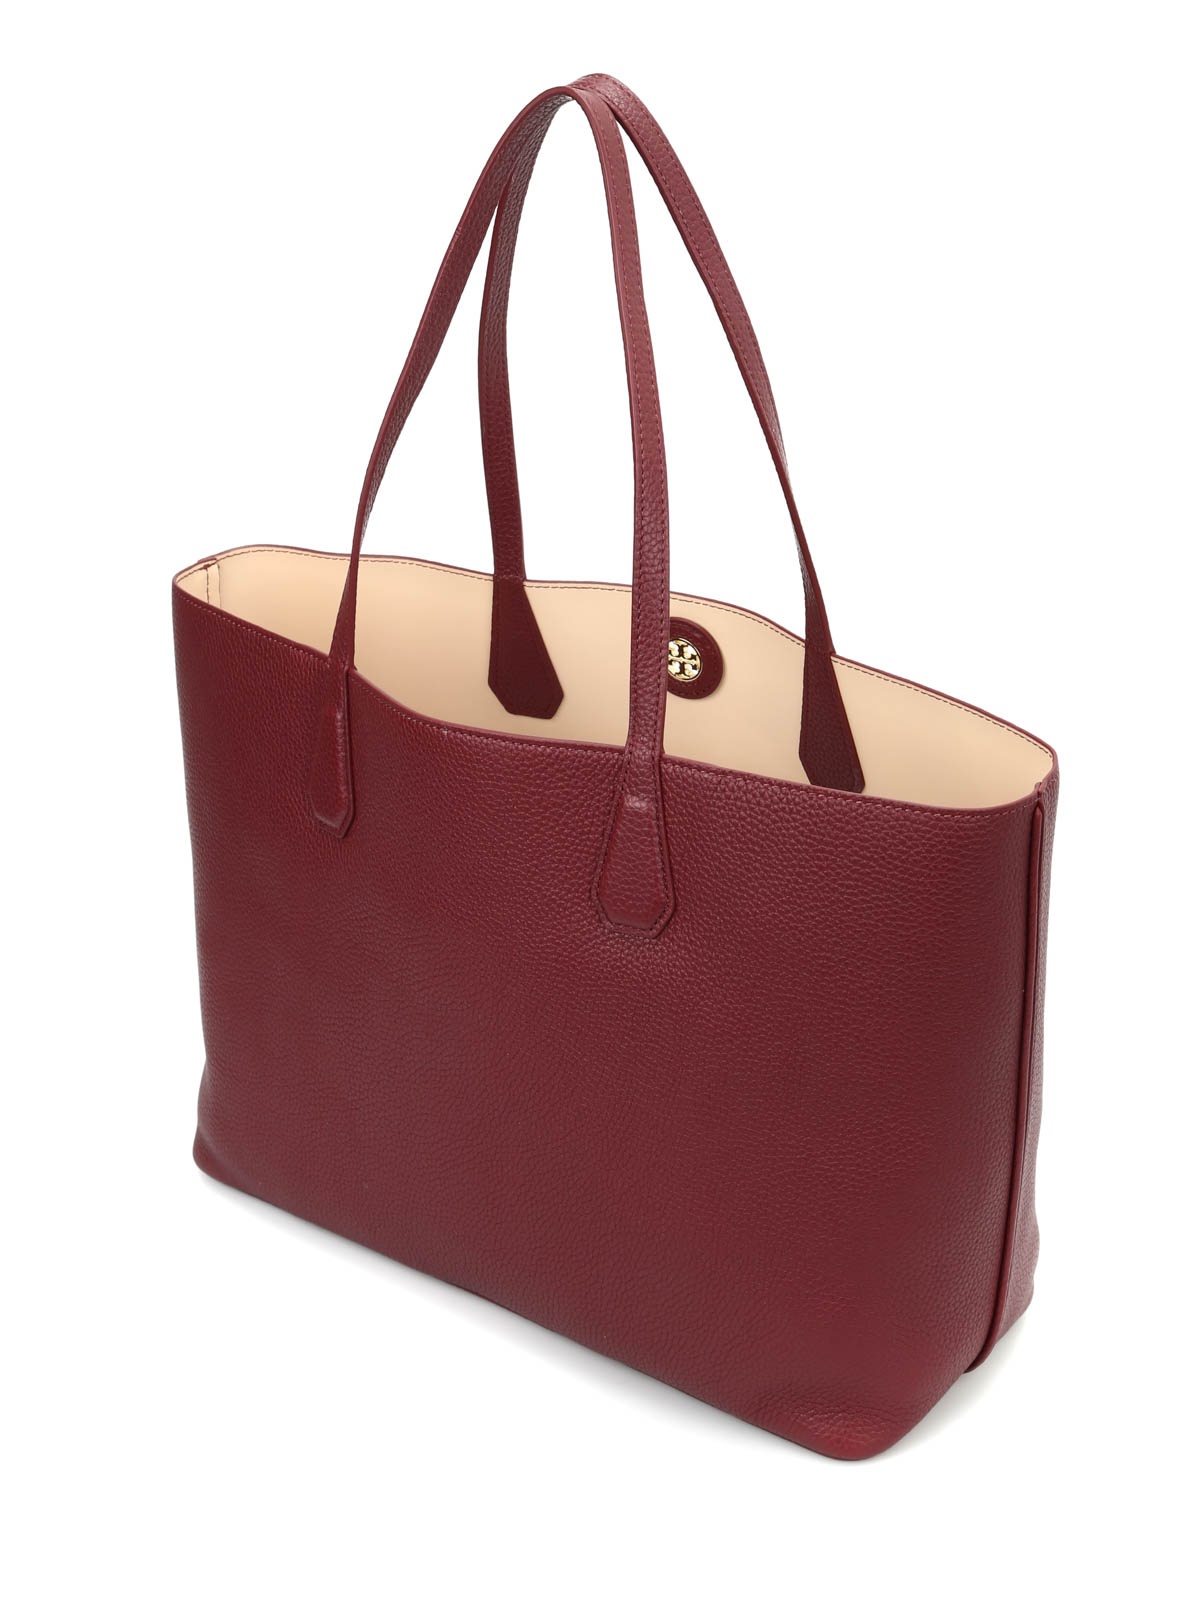 Tory Burch Perry Leather Shopper Tote Bag